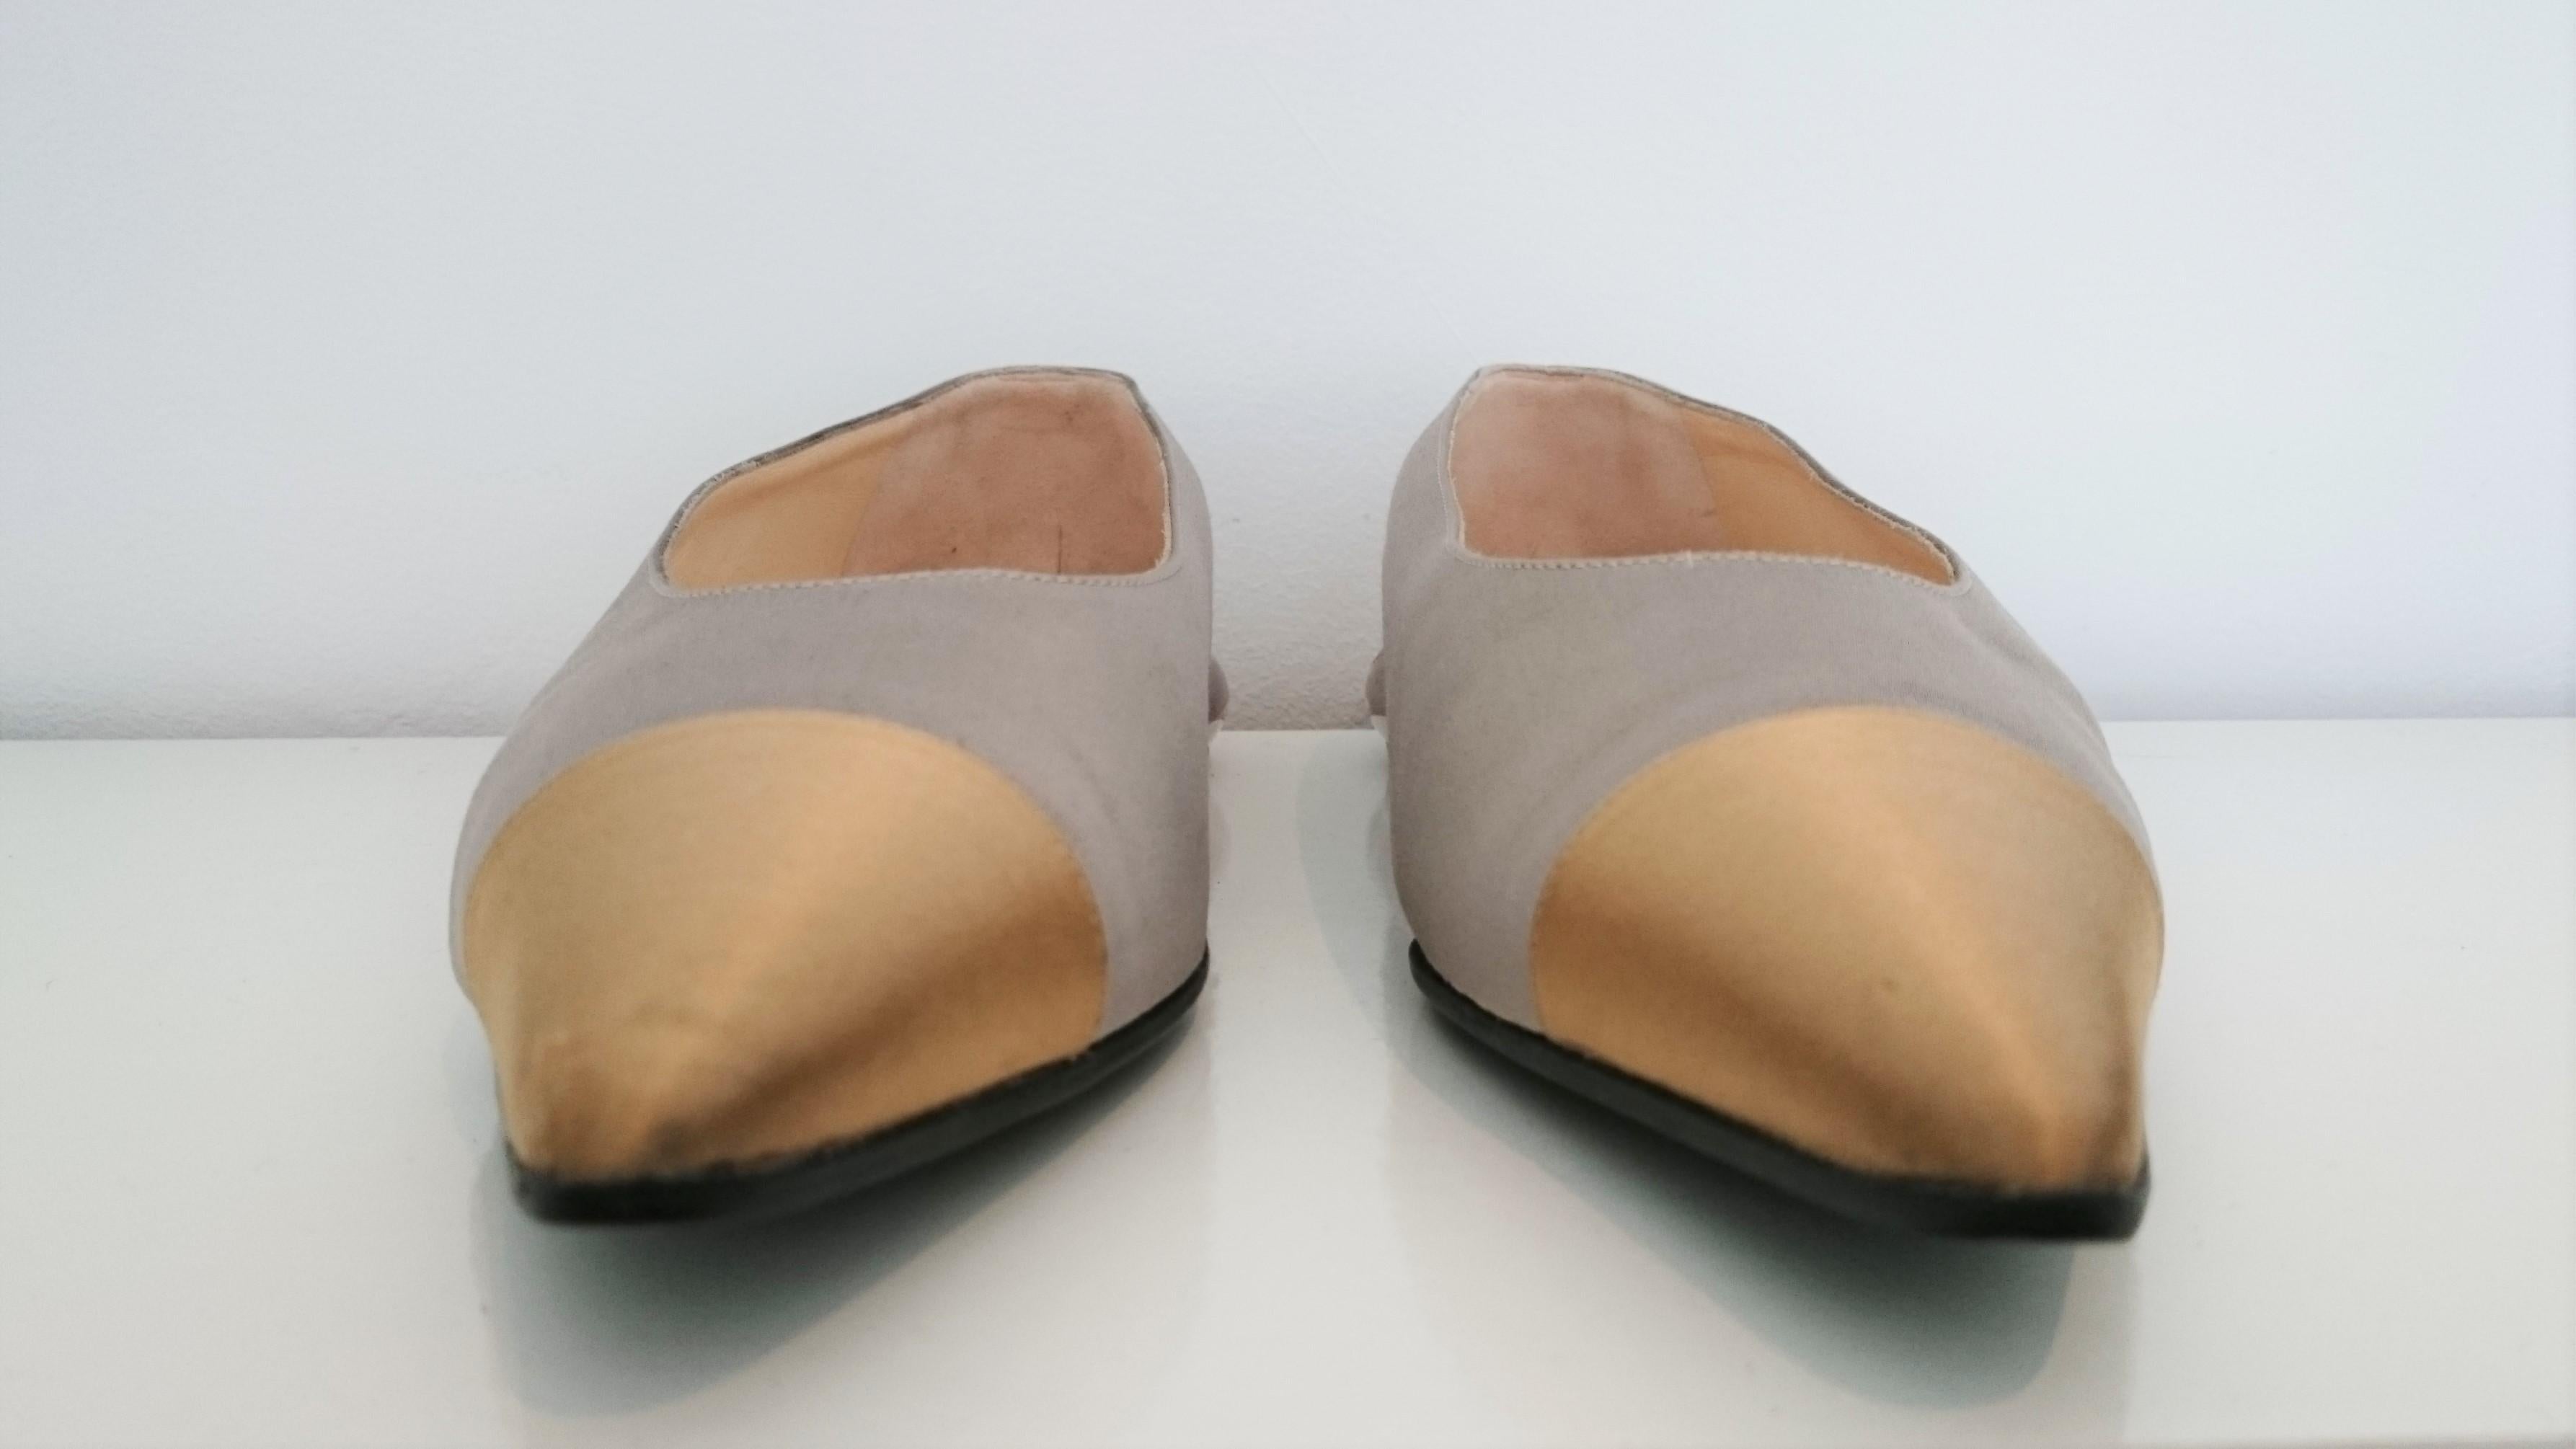 Chanel Gray Silk pointed ballet flats with Golden front. 
Transparent silicone heels. 
Size 40 1/2
Original Chanel Dust-bag not included.
Made in Italy